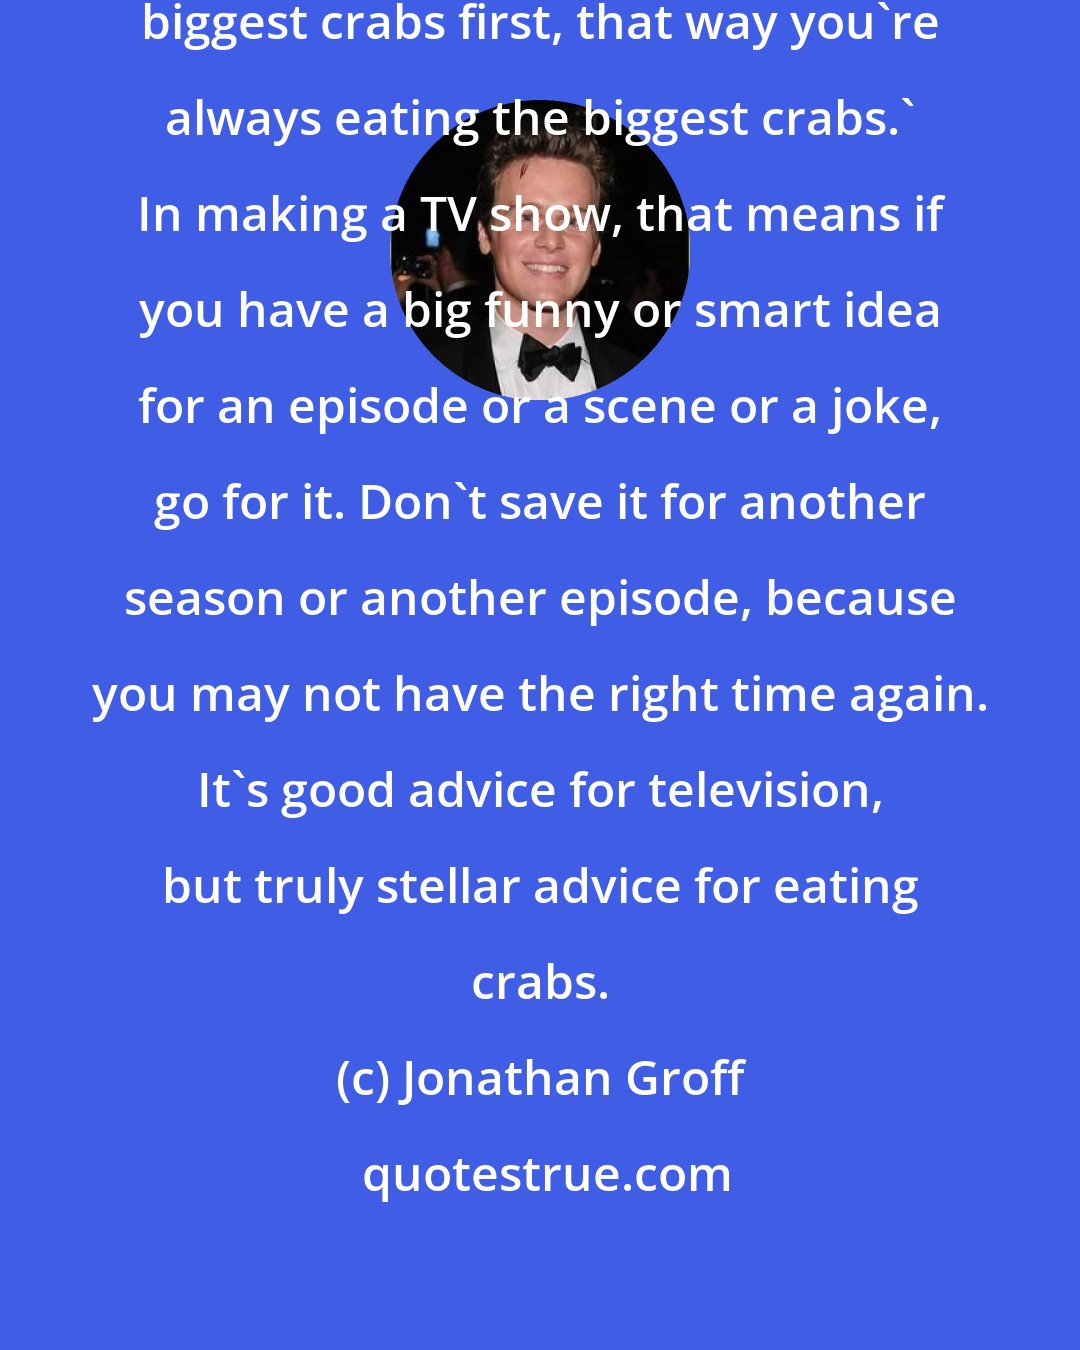 Jonathan Groff: My grandfather used to say 'Eat the biggest crabs first, that way you're always eating the biggest crabs.' In making a TV show, that means if you have a big funny or smart idea for an episode or a scene or a joke, go for it. Don't save it for another season or another episode, because you may not have the right time again. It's good advice for television, but truly stellar advice for eating crabs.